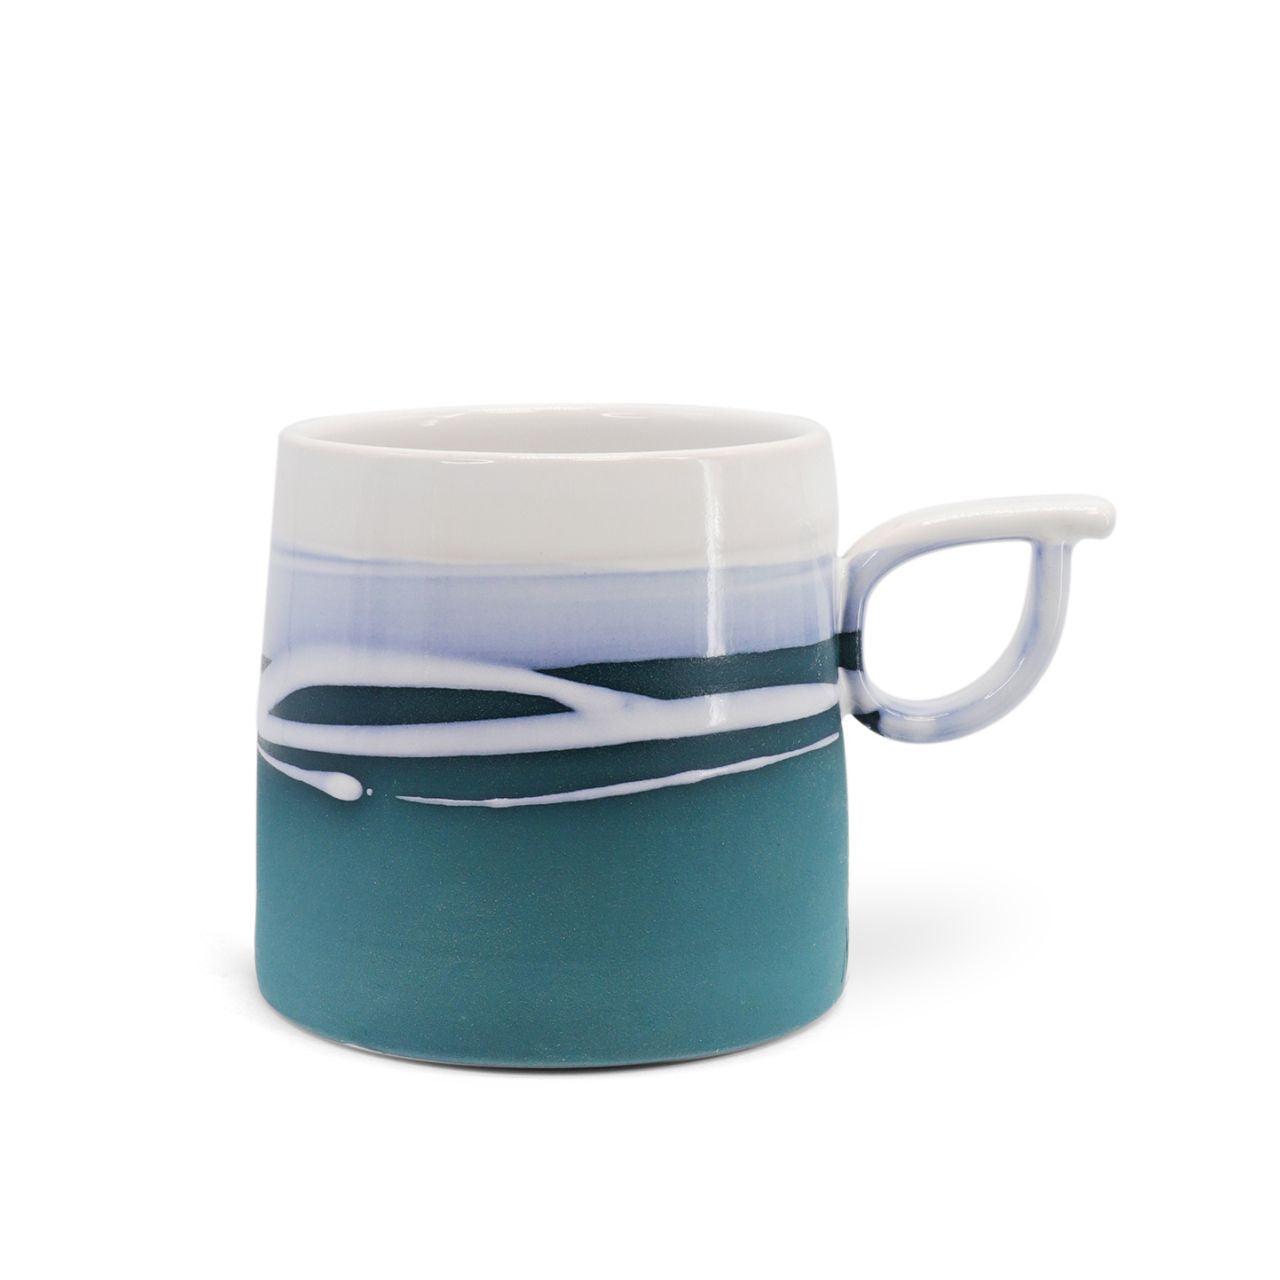 Tipperary Crystal Paul Maloney Pottery Teal S/4 Mugs  This Paul Maloney Pottery Teal set of Mugs is the perfect way to enjoy your favourite hot beverage. Crafted by renowned potter Paul Maloney, this mug is made of durable and long-lasting clay, with a glazed teal finish that is sure to impress. Ideal for all kinds of hot drinks, this mug is sure to bring elegance to your morning routine.